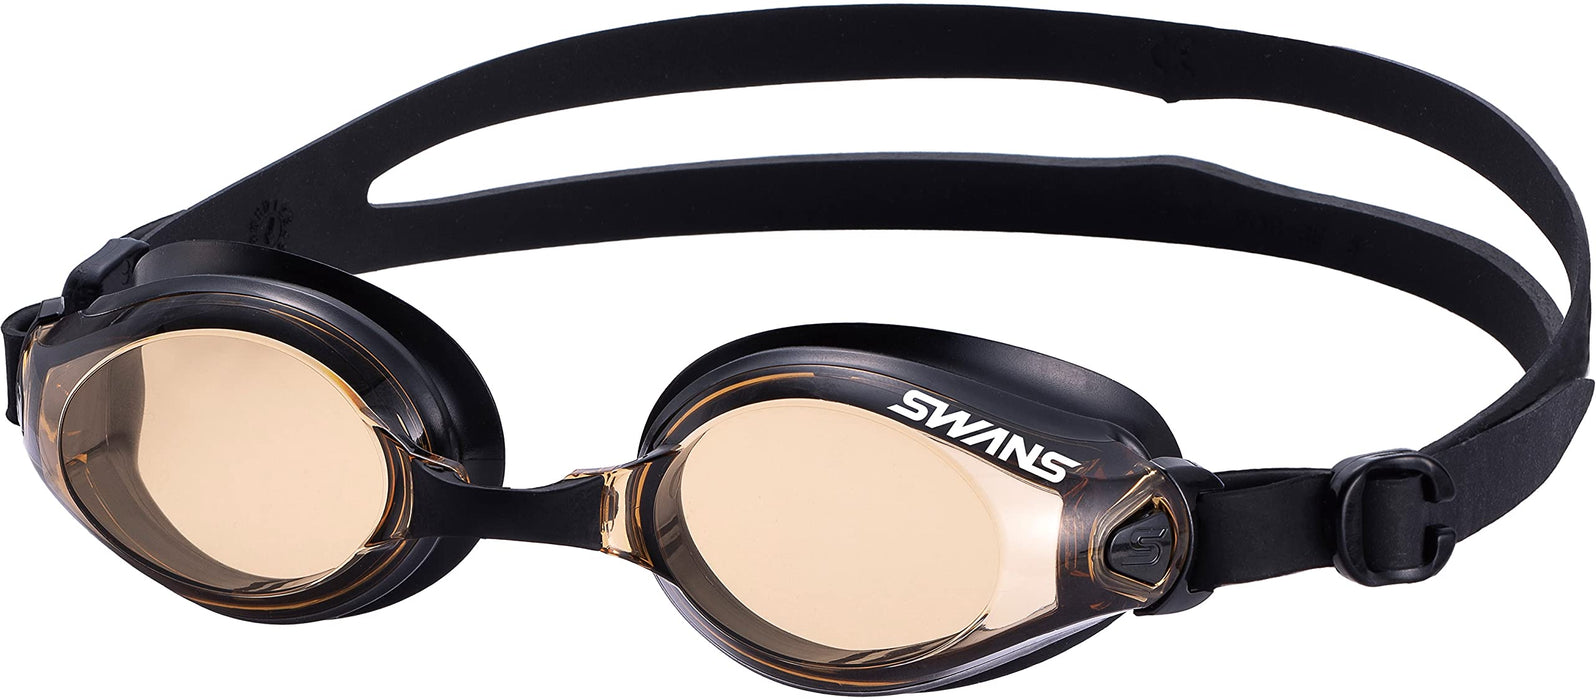 SWANS  Swimming Goggles SW-45N BR Brown Fitness Adult Made in Japan Plastic NEW_1